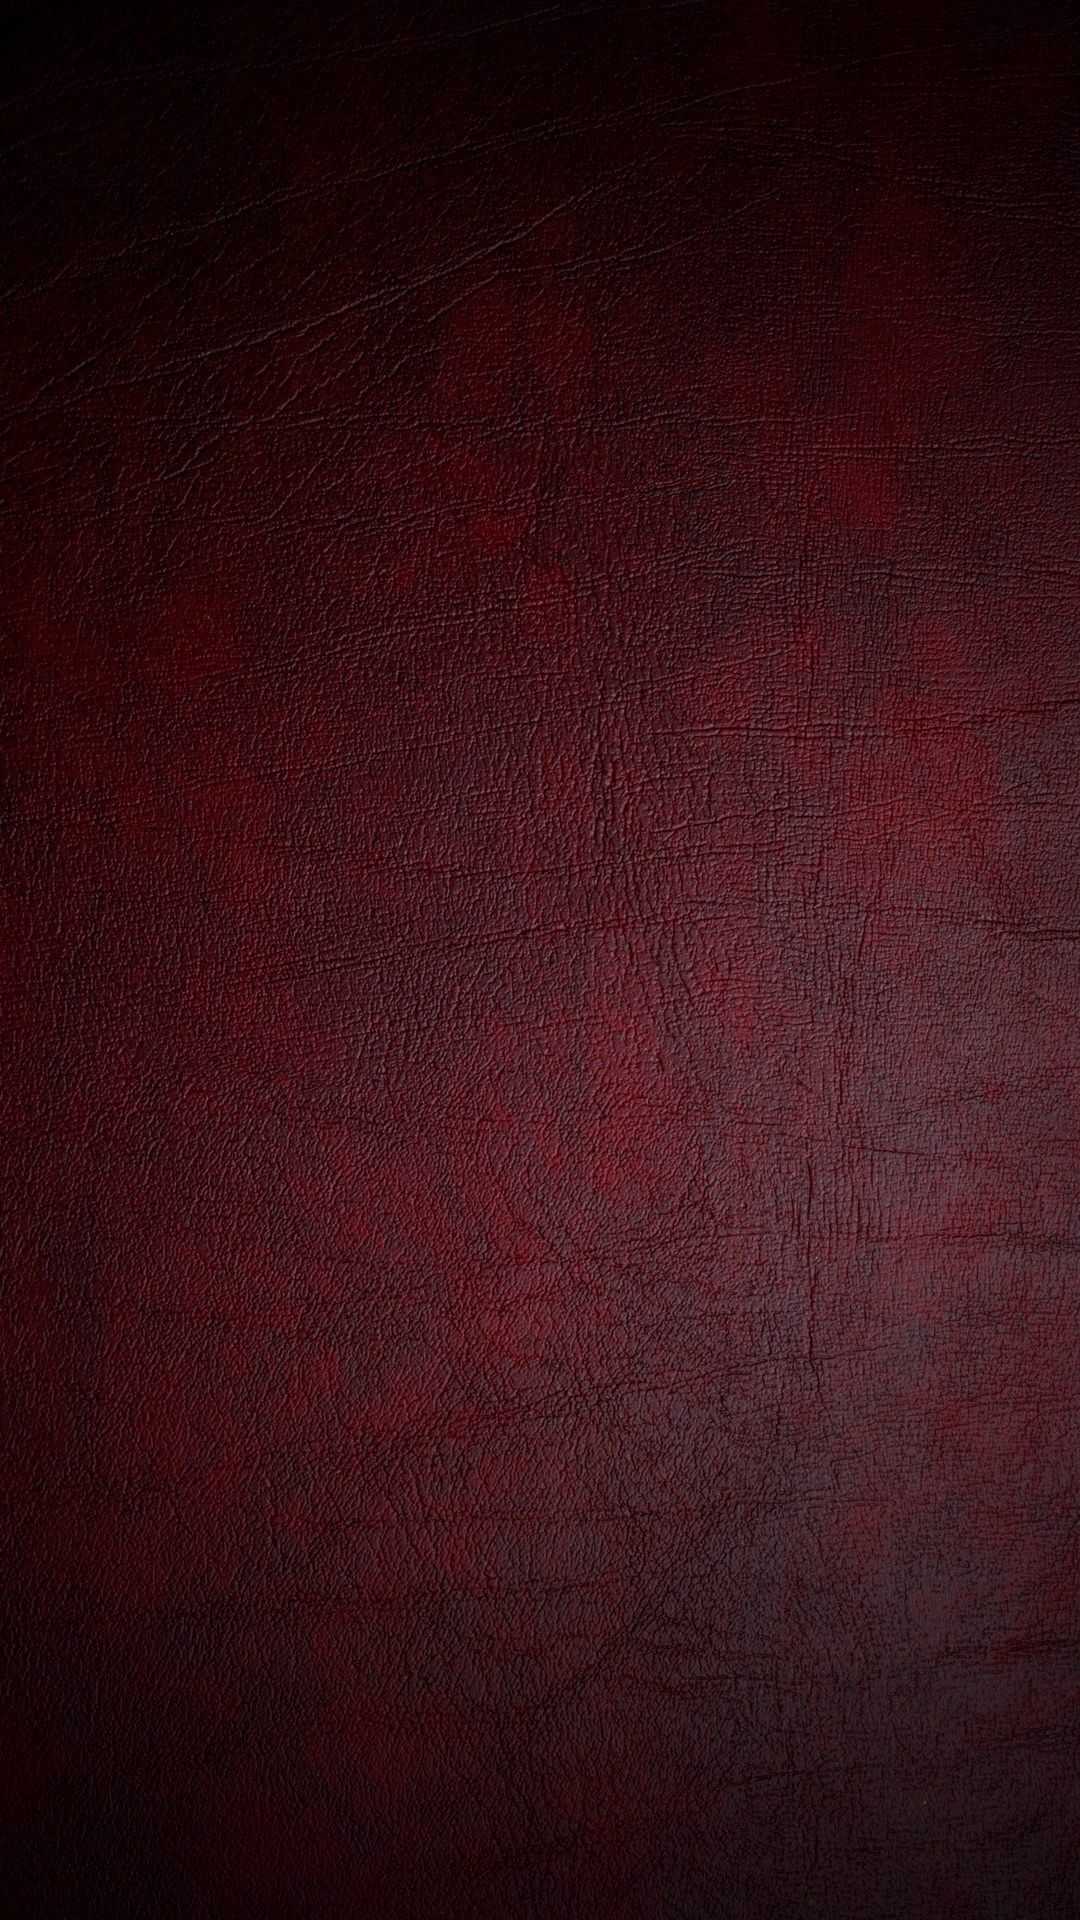 Red and Brown Wallpaper